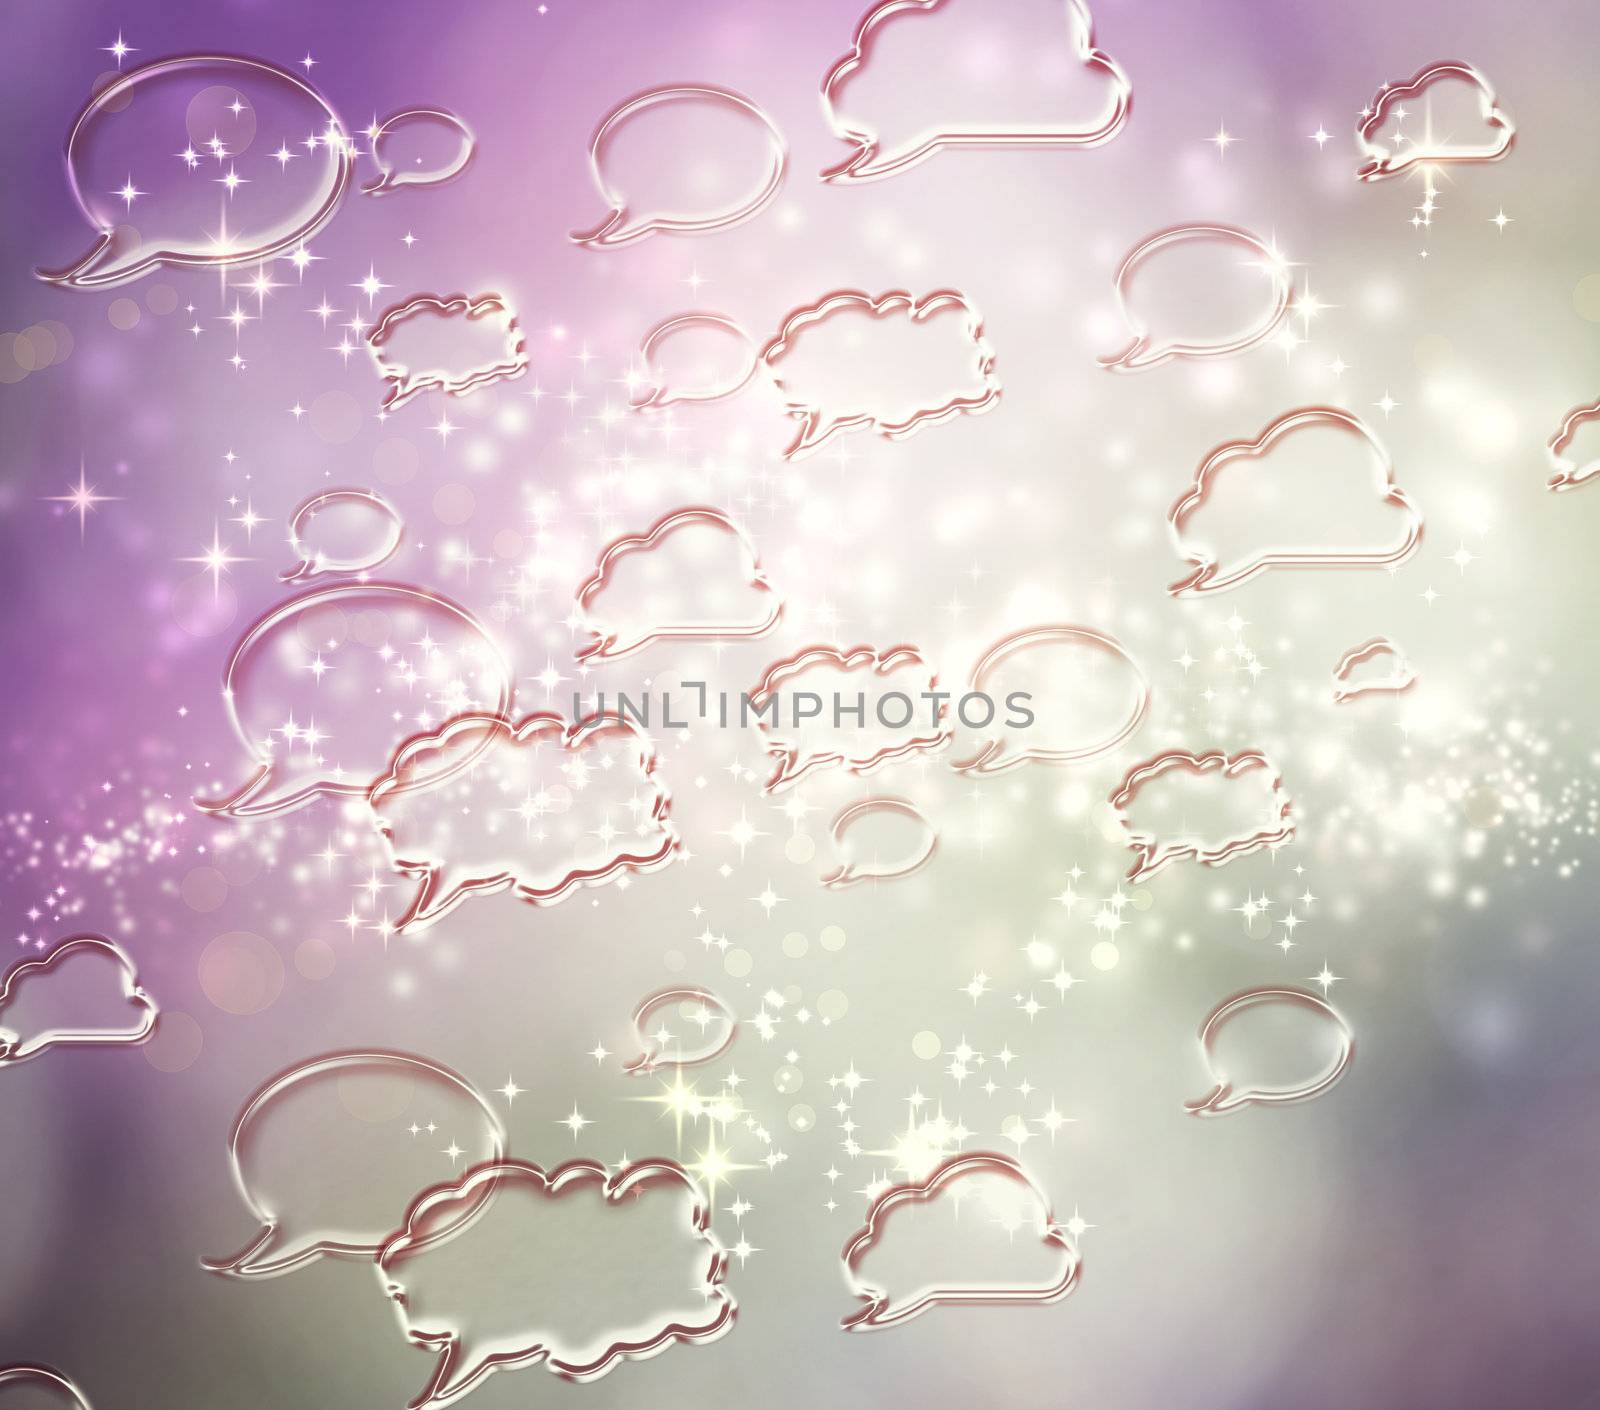 Speech Bubbles on Abstract Lights Background by melpomene